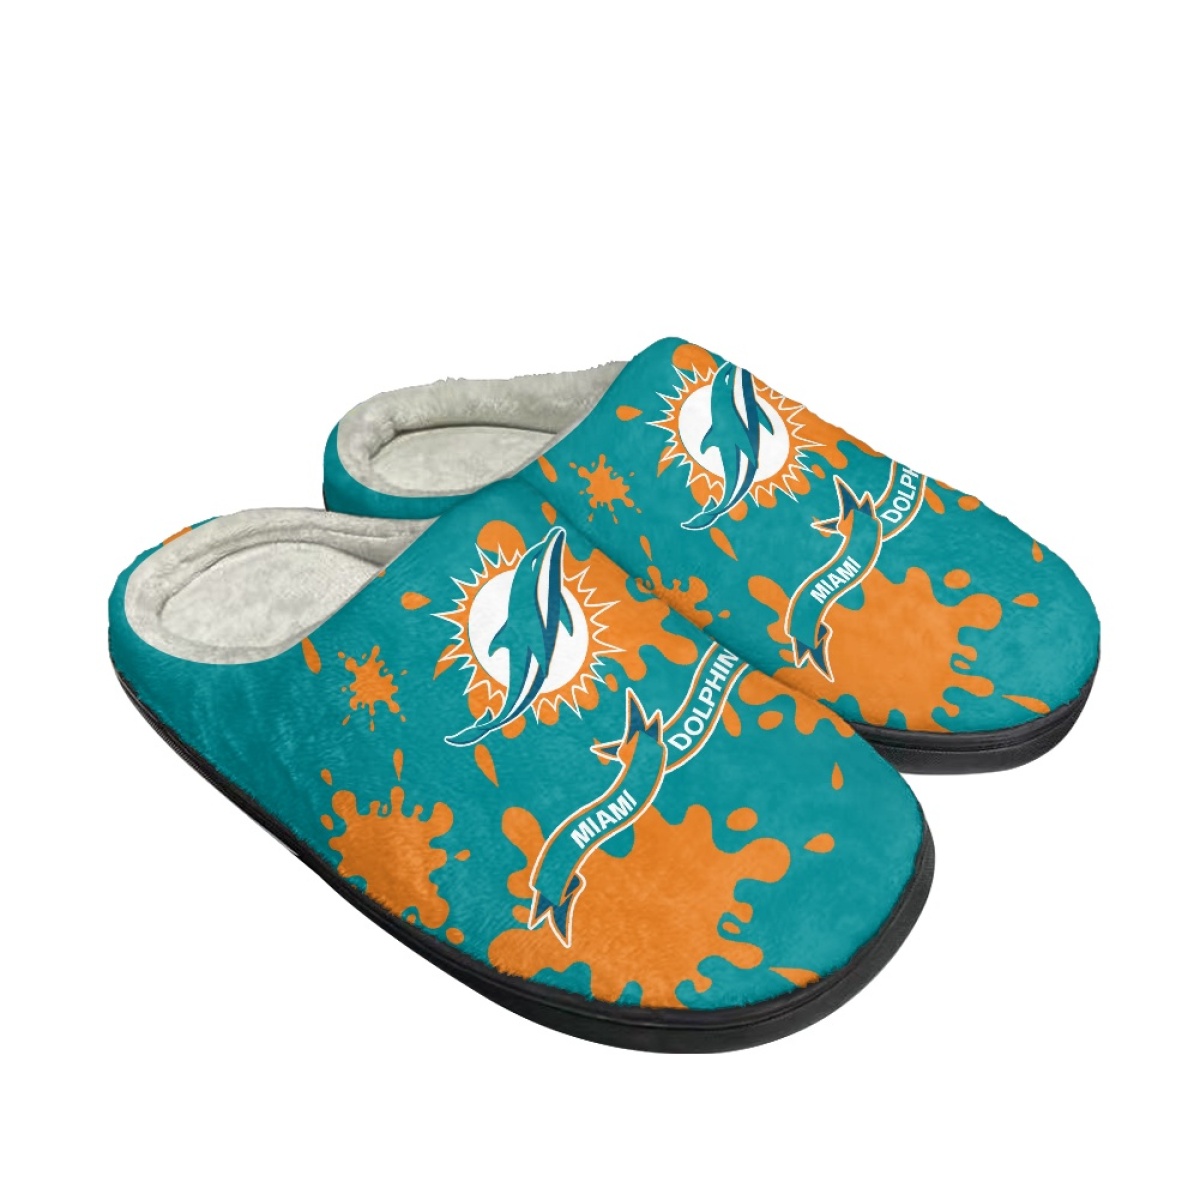 Men's Miami Dolphins Slippers/Shoes 006